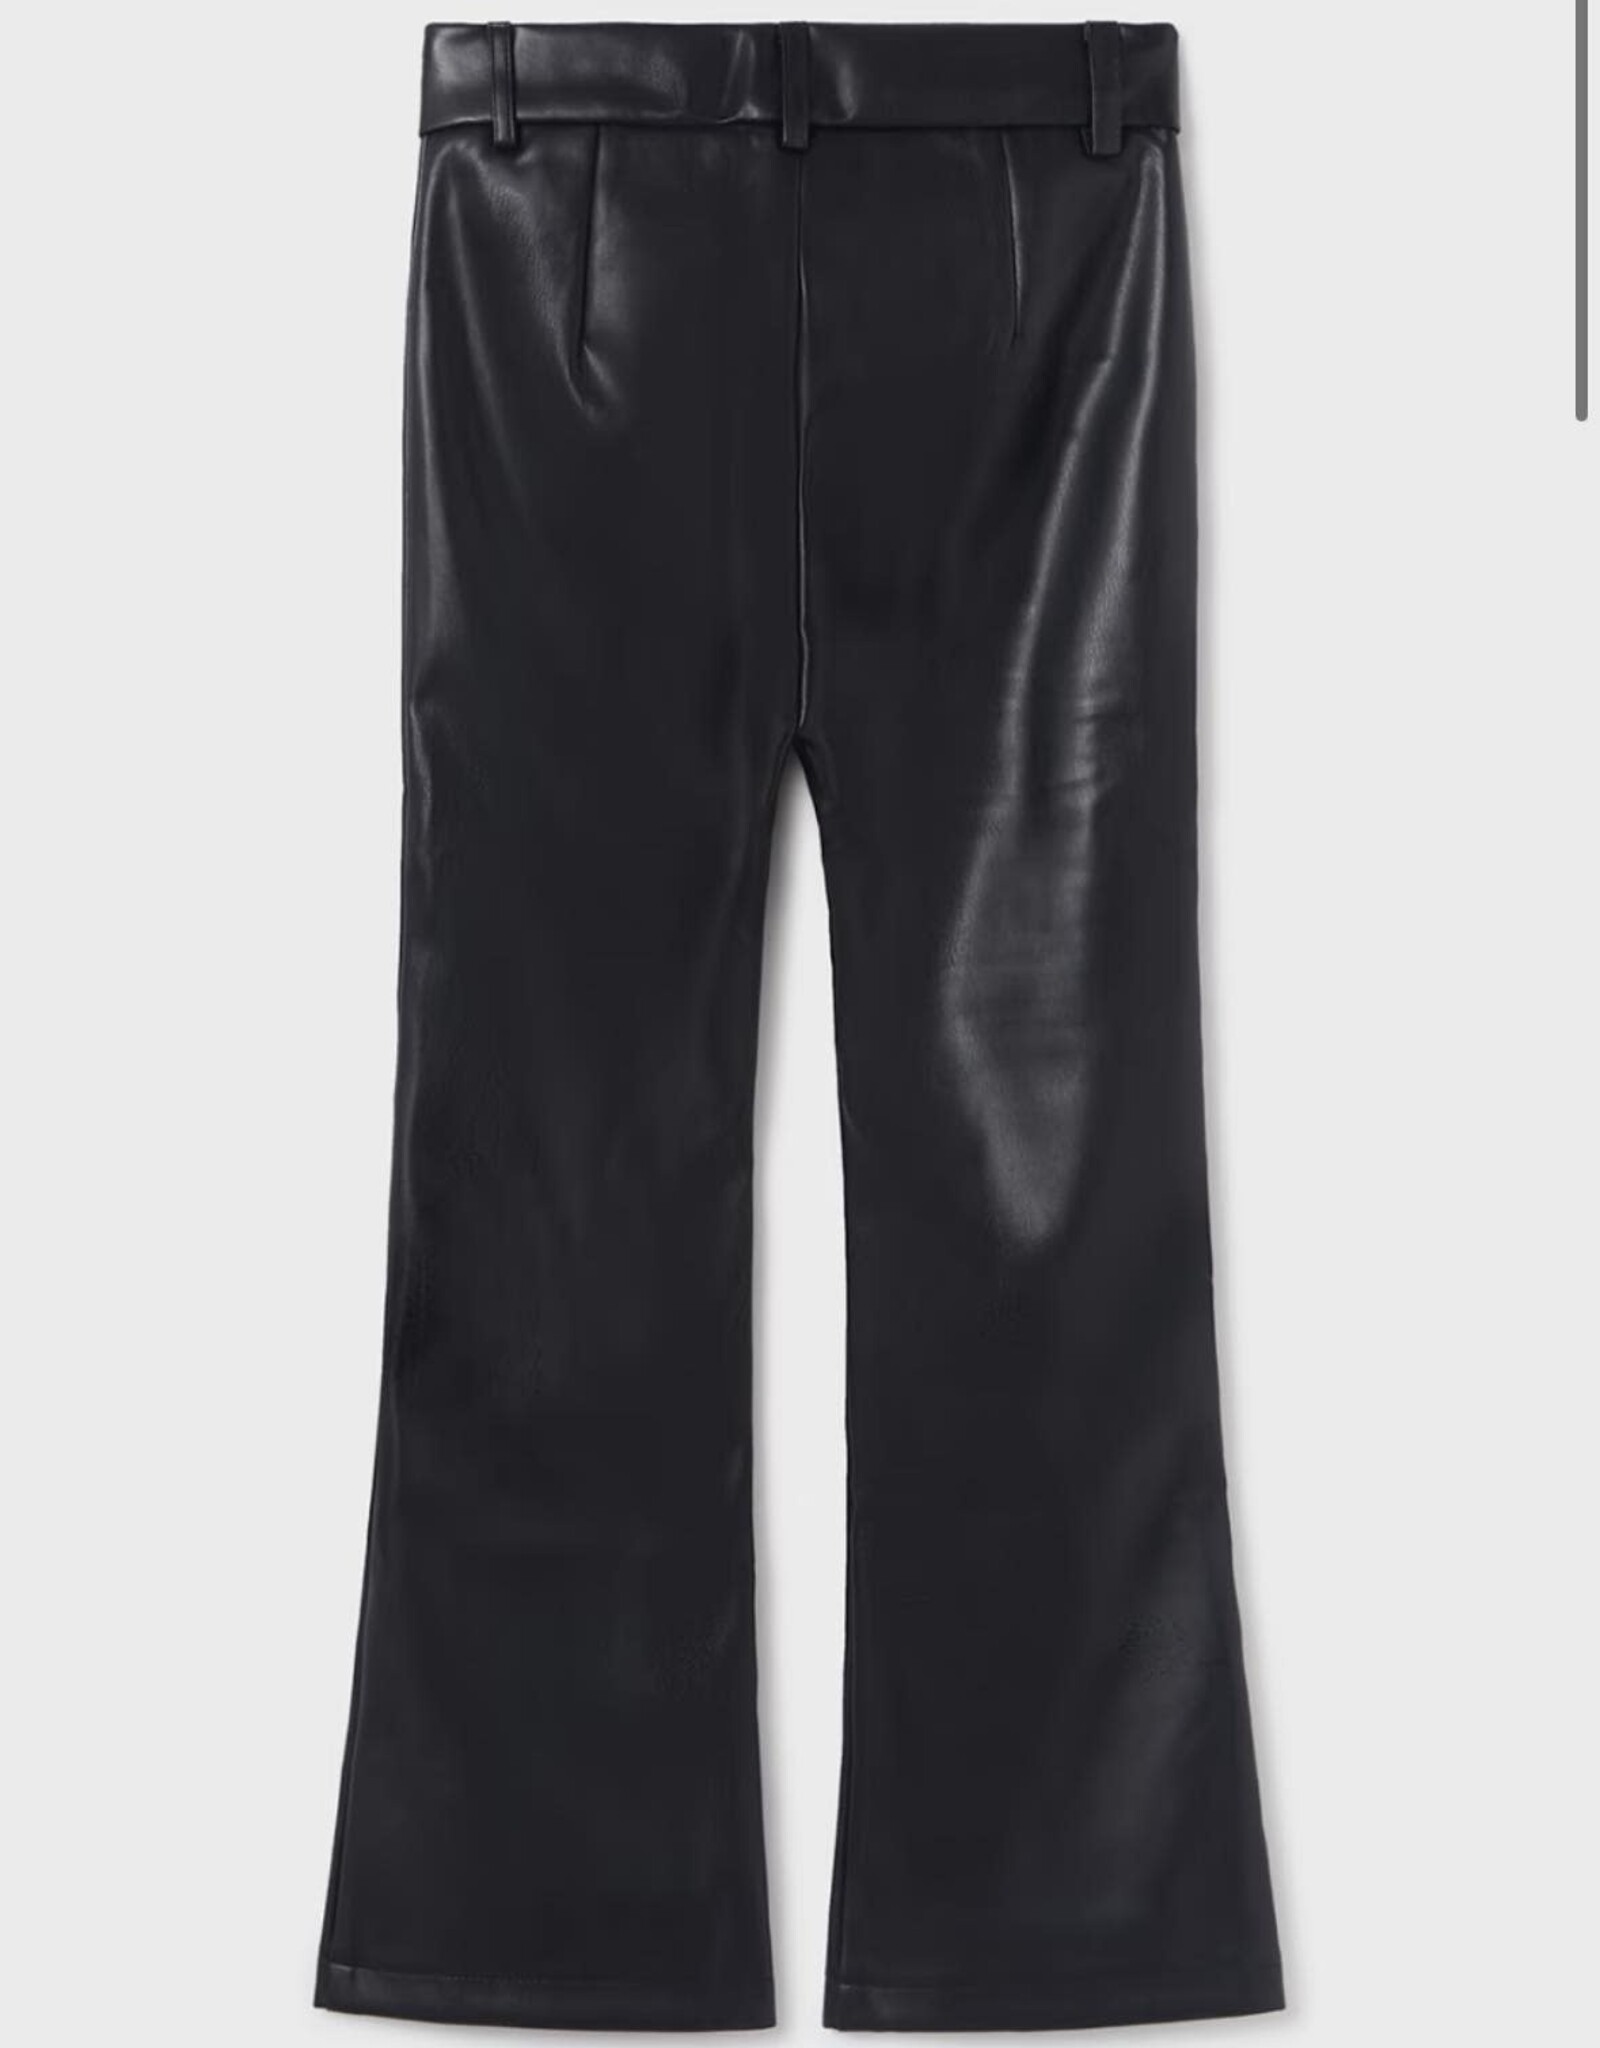 Mayoral Claire Leather Pant in Black